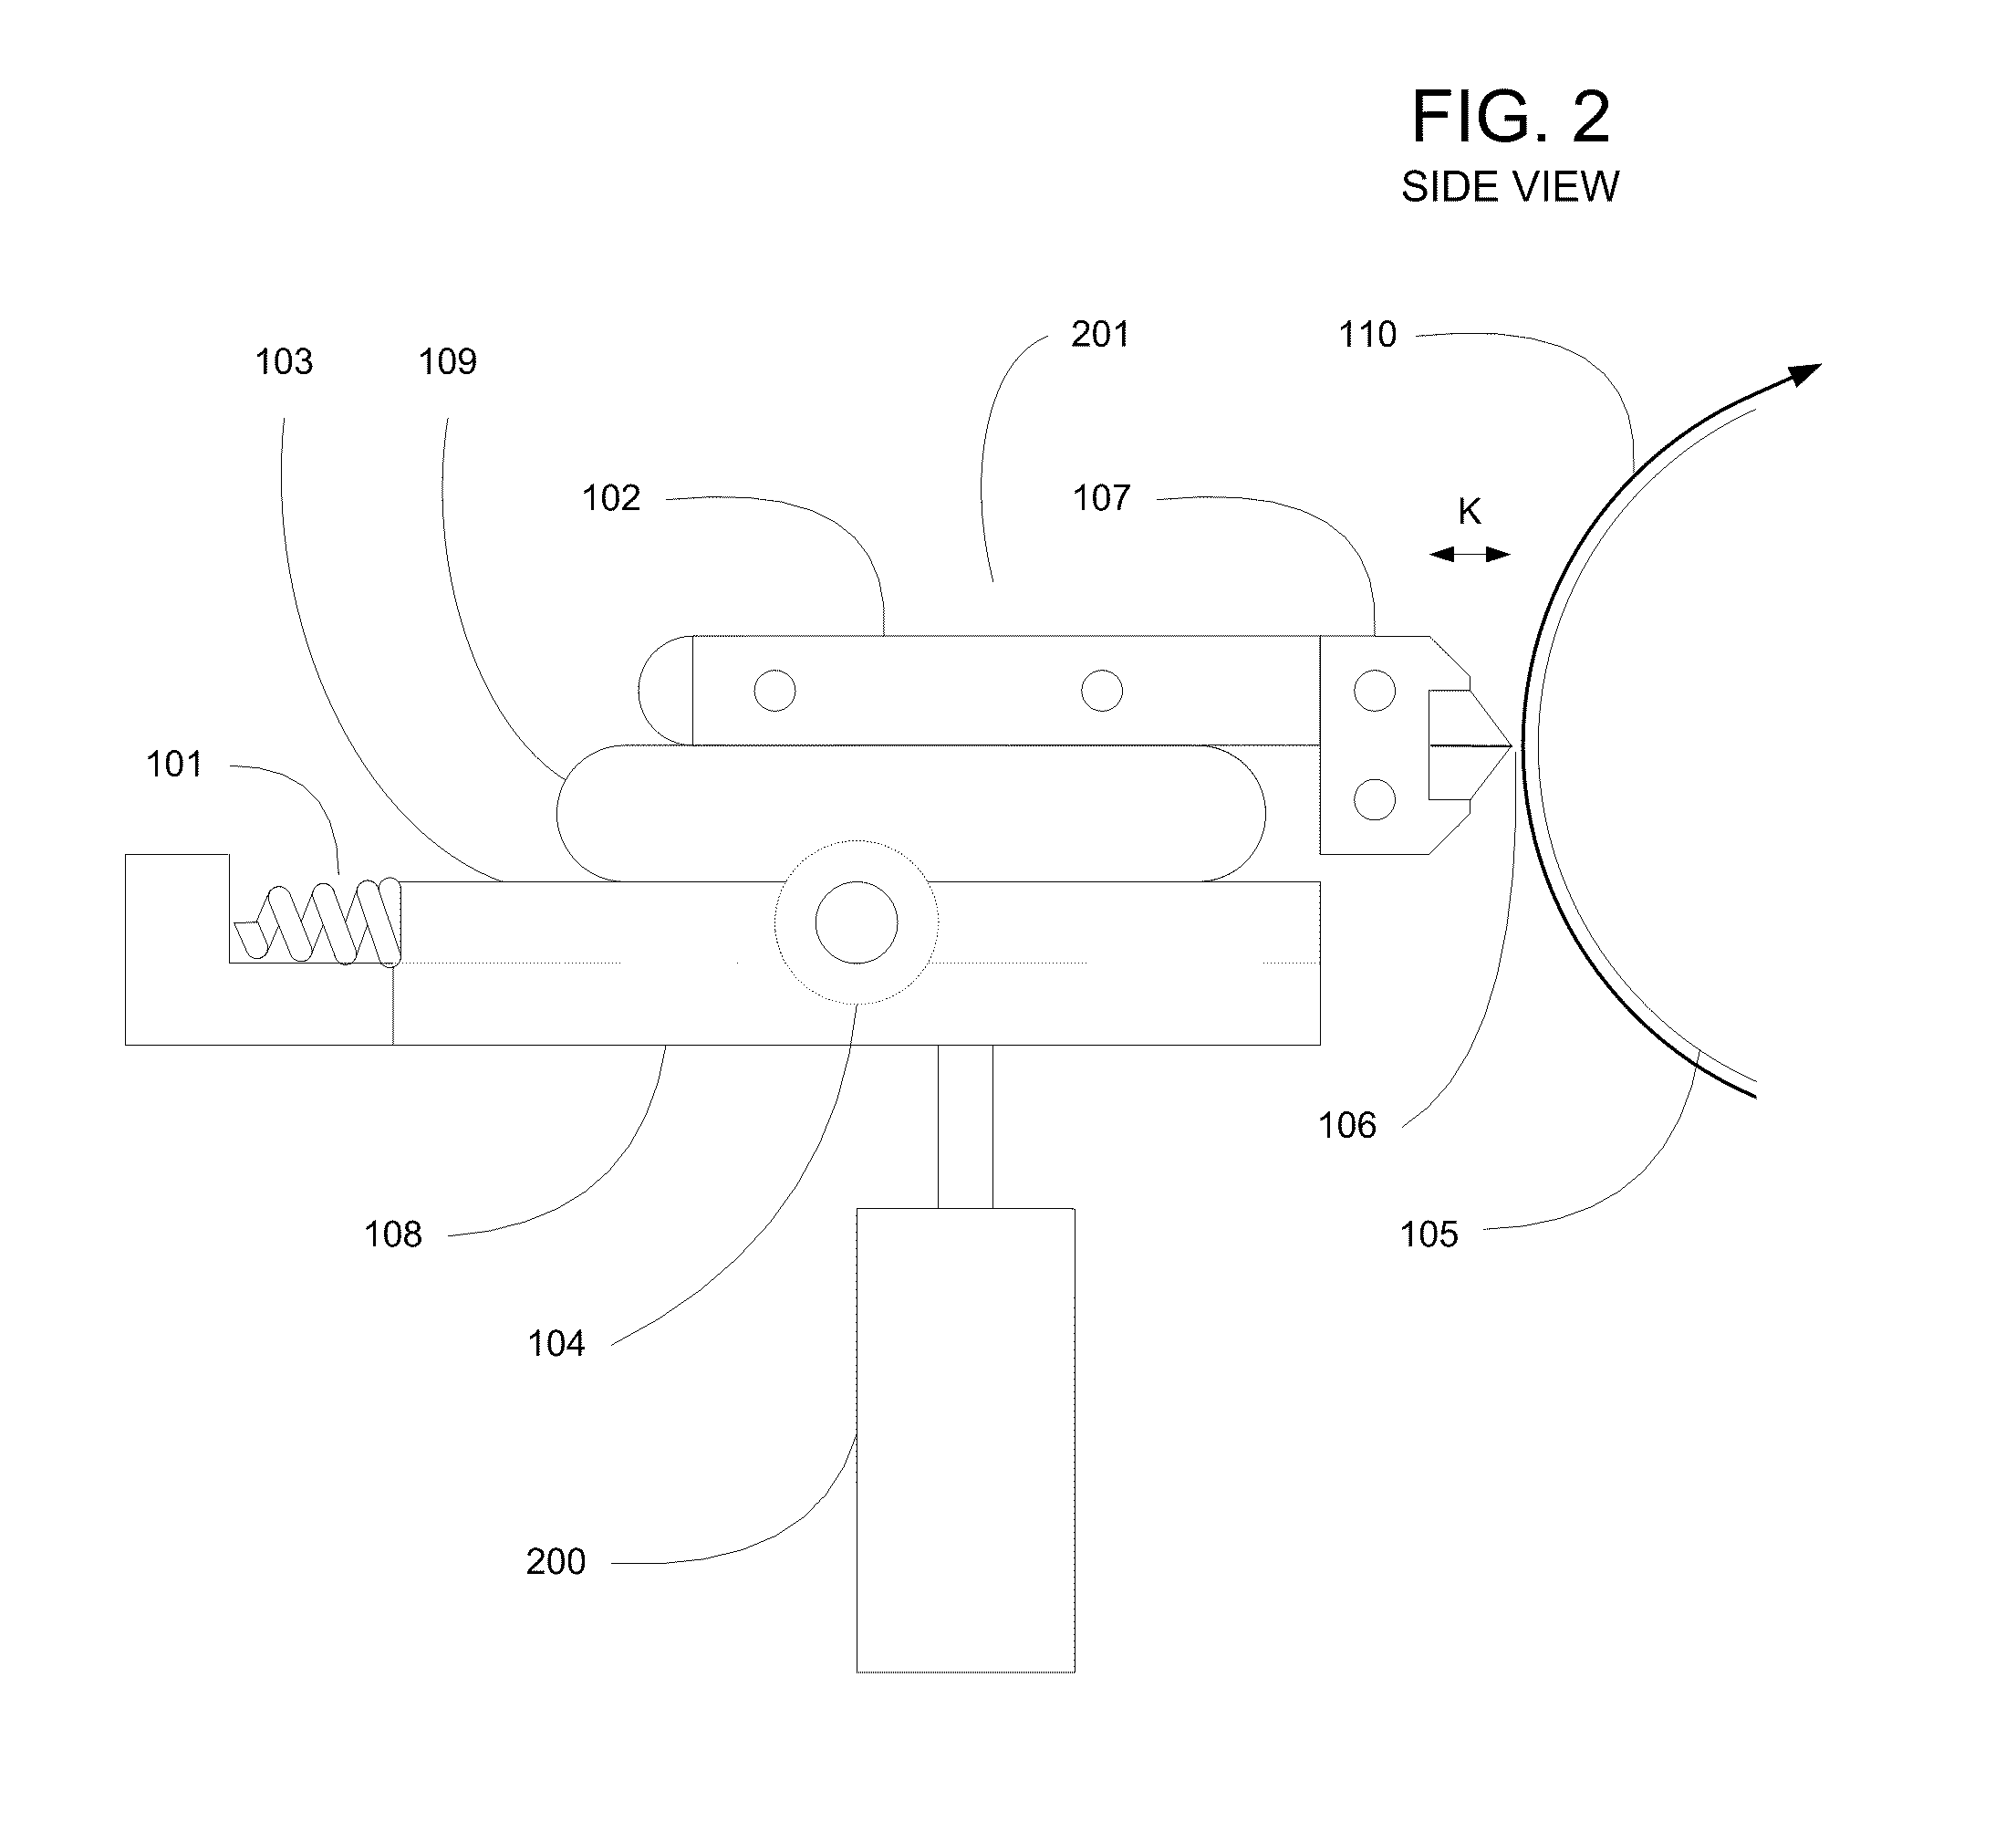 Apparatus for slot die setup and control during coating